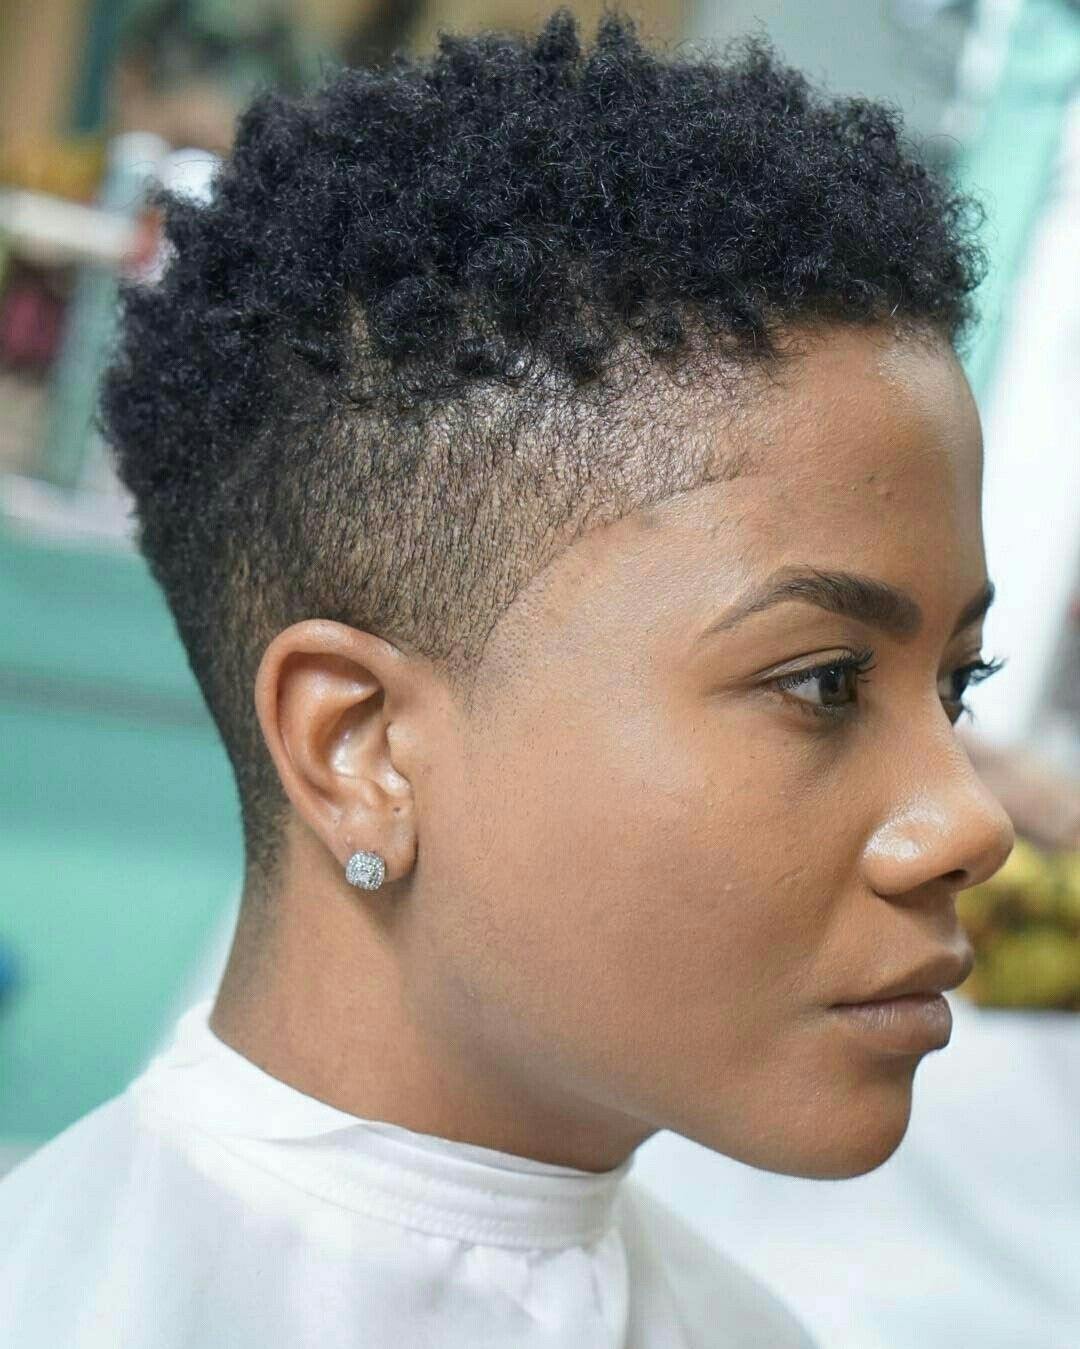 Low Fade Haircut For Black Women | Afro Styles In 2019 pertaining to Images Of Black Women Natural Faded Haircut